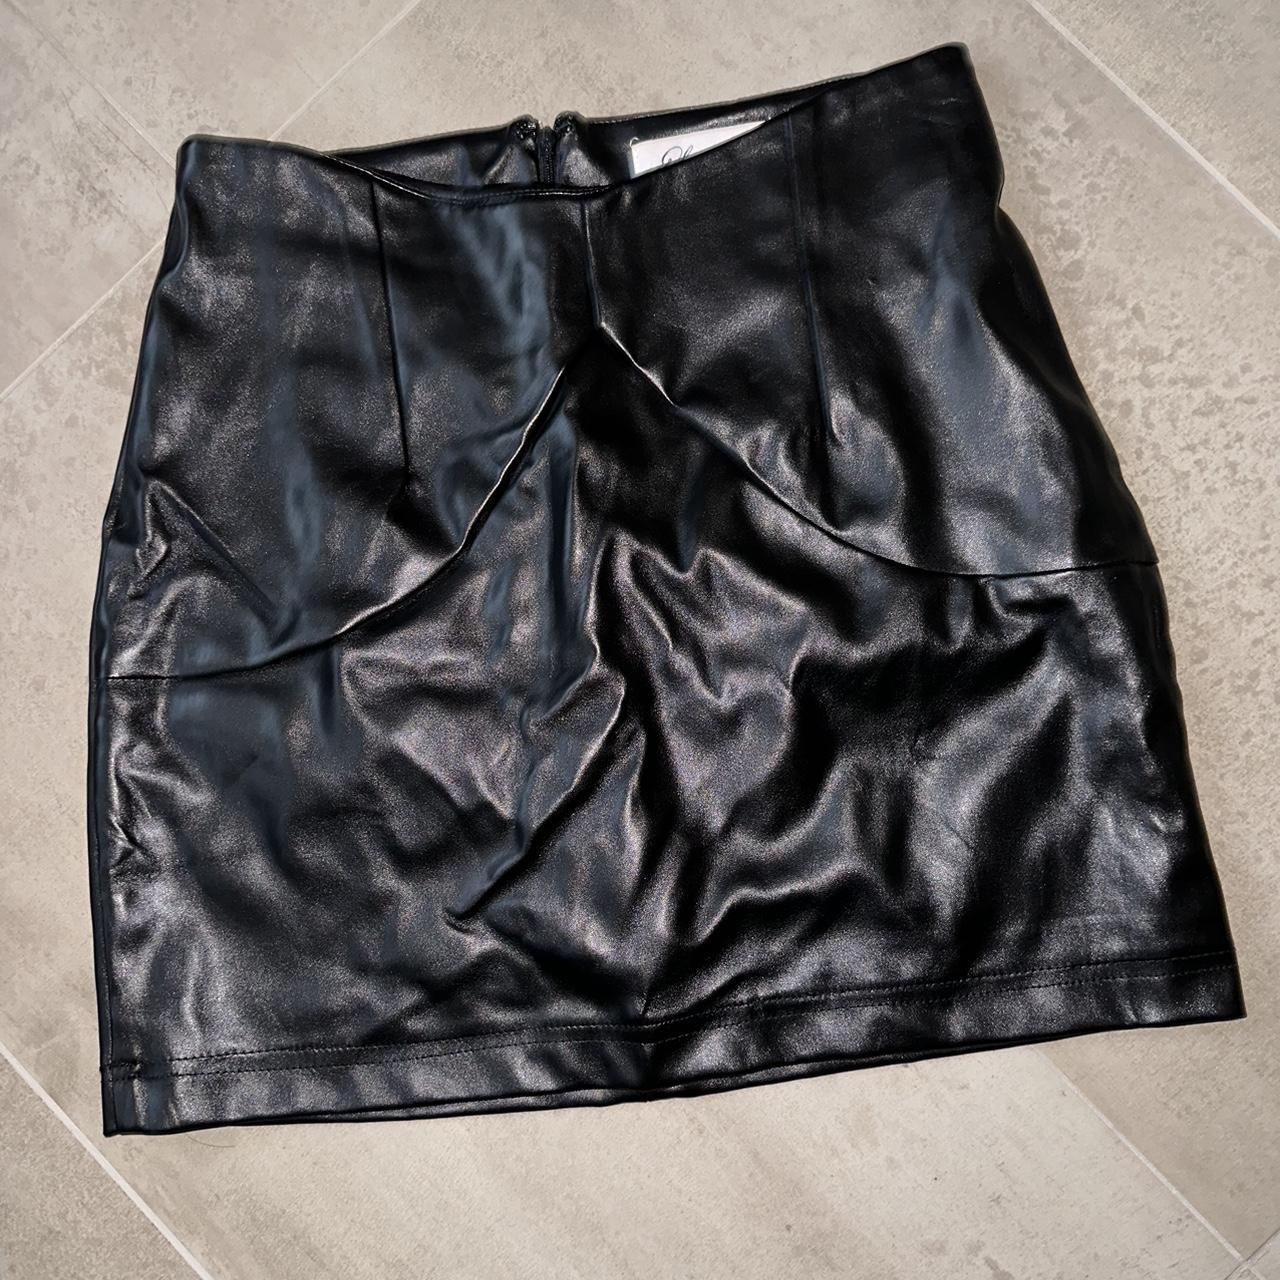 Luvalot black leather look mini skirt New without - Depop